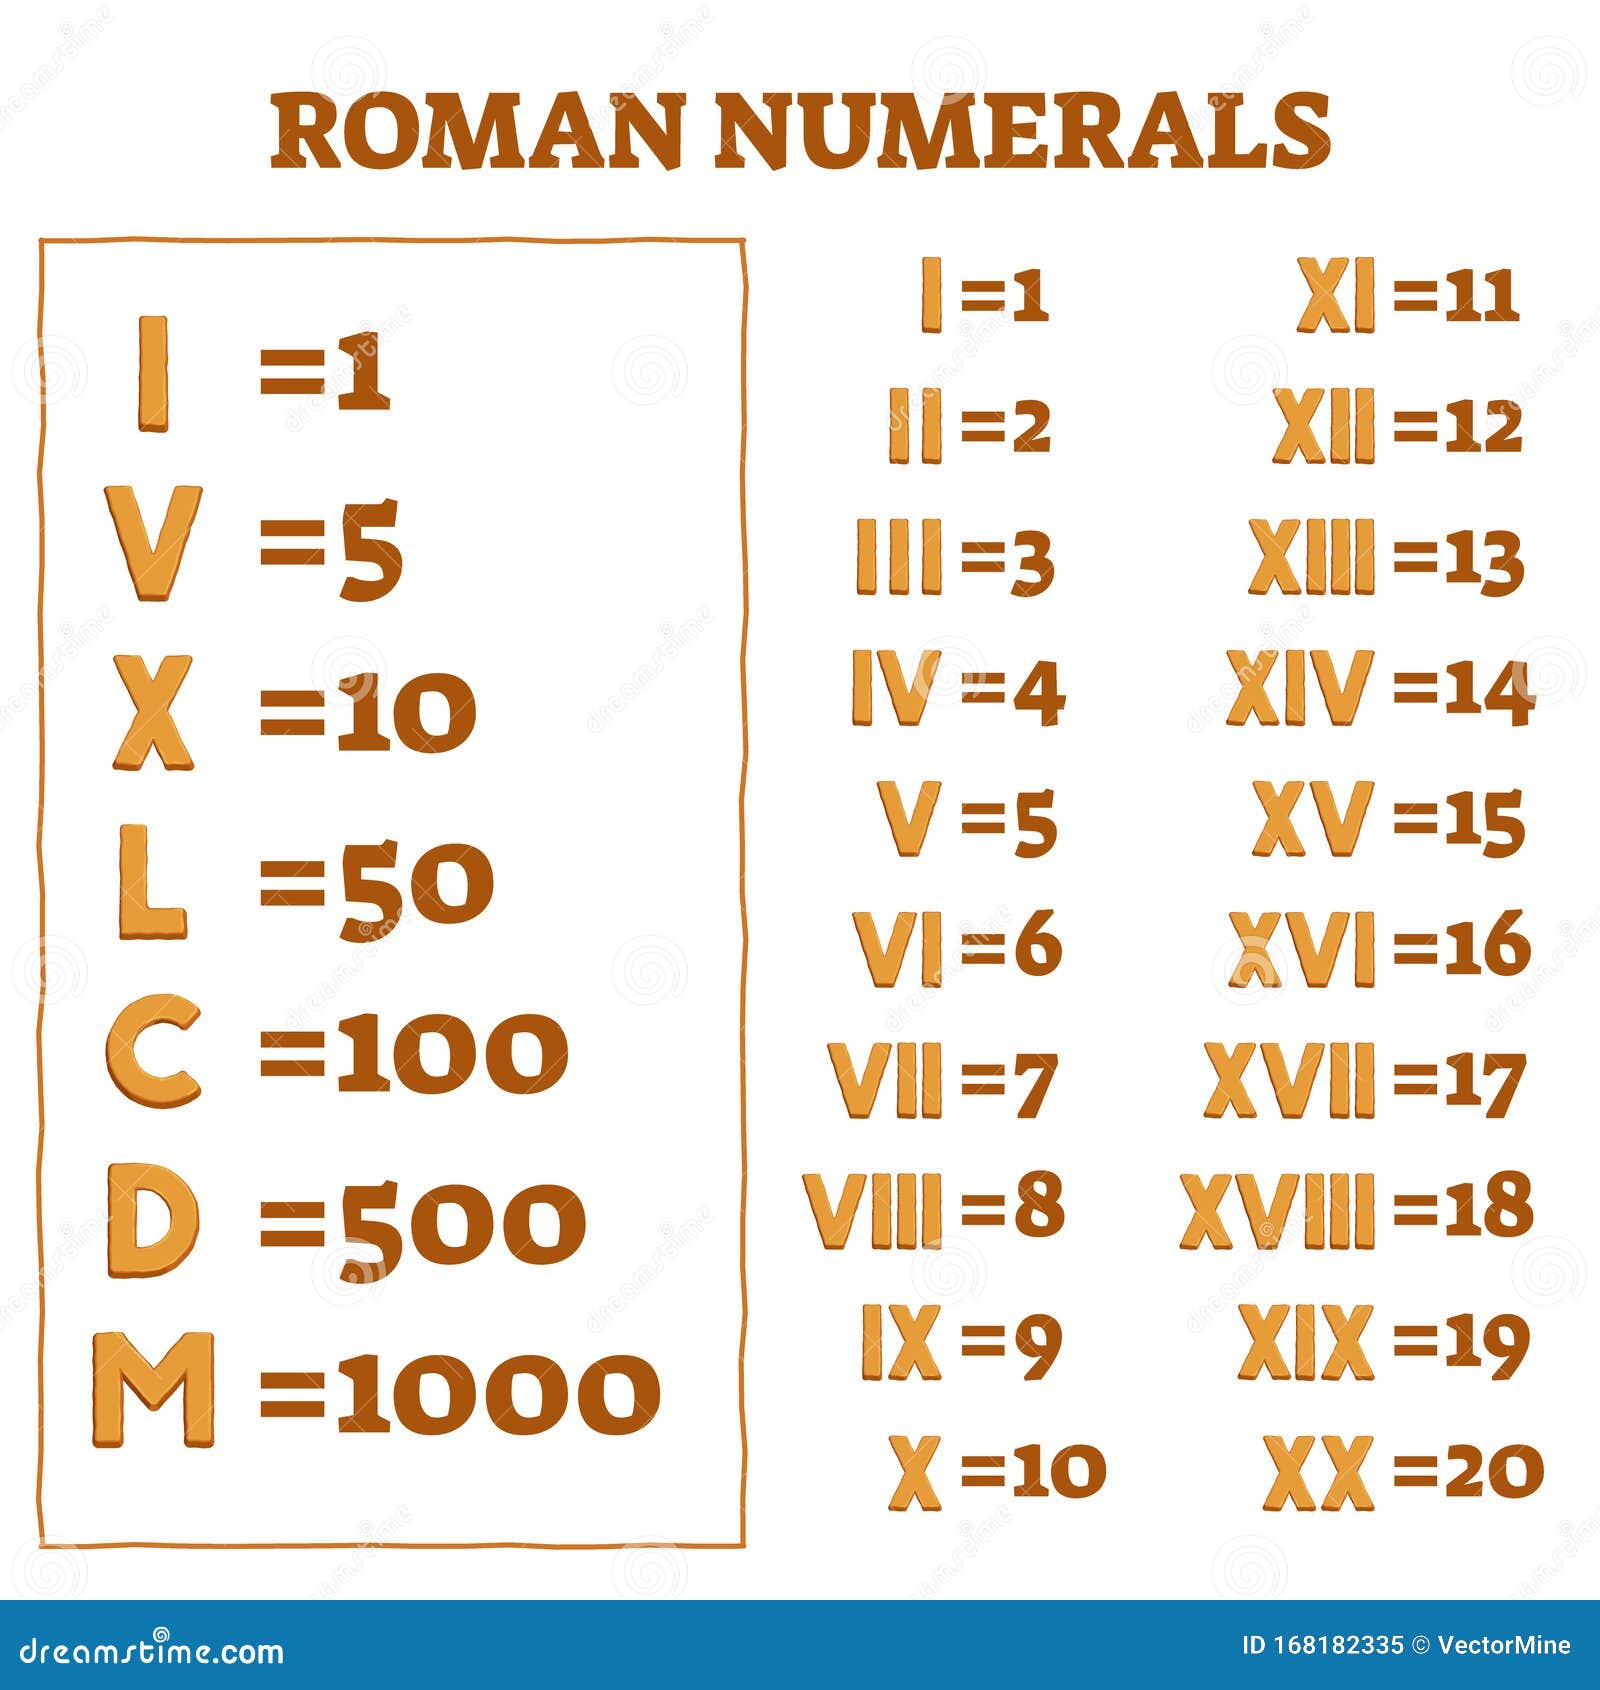 Roman Numerals Vector Illustration. Old Numbers and Letters Counting ...